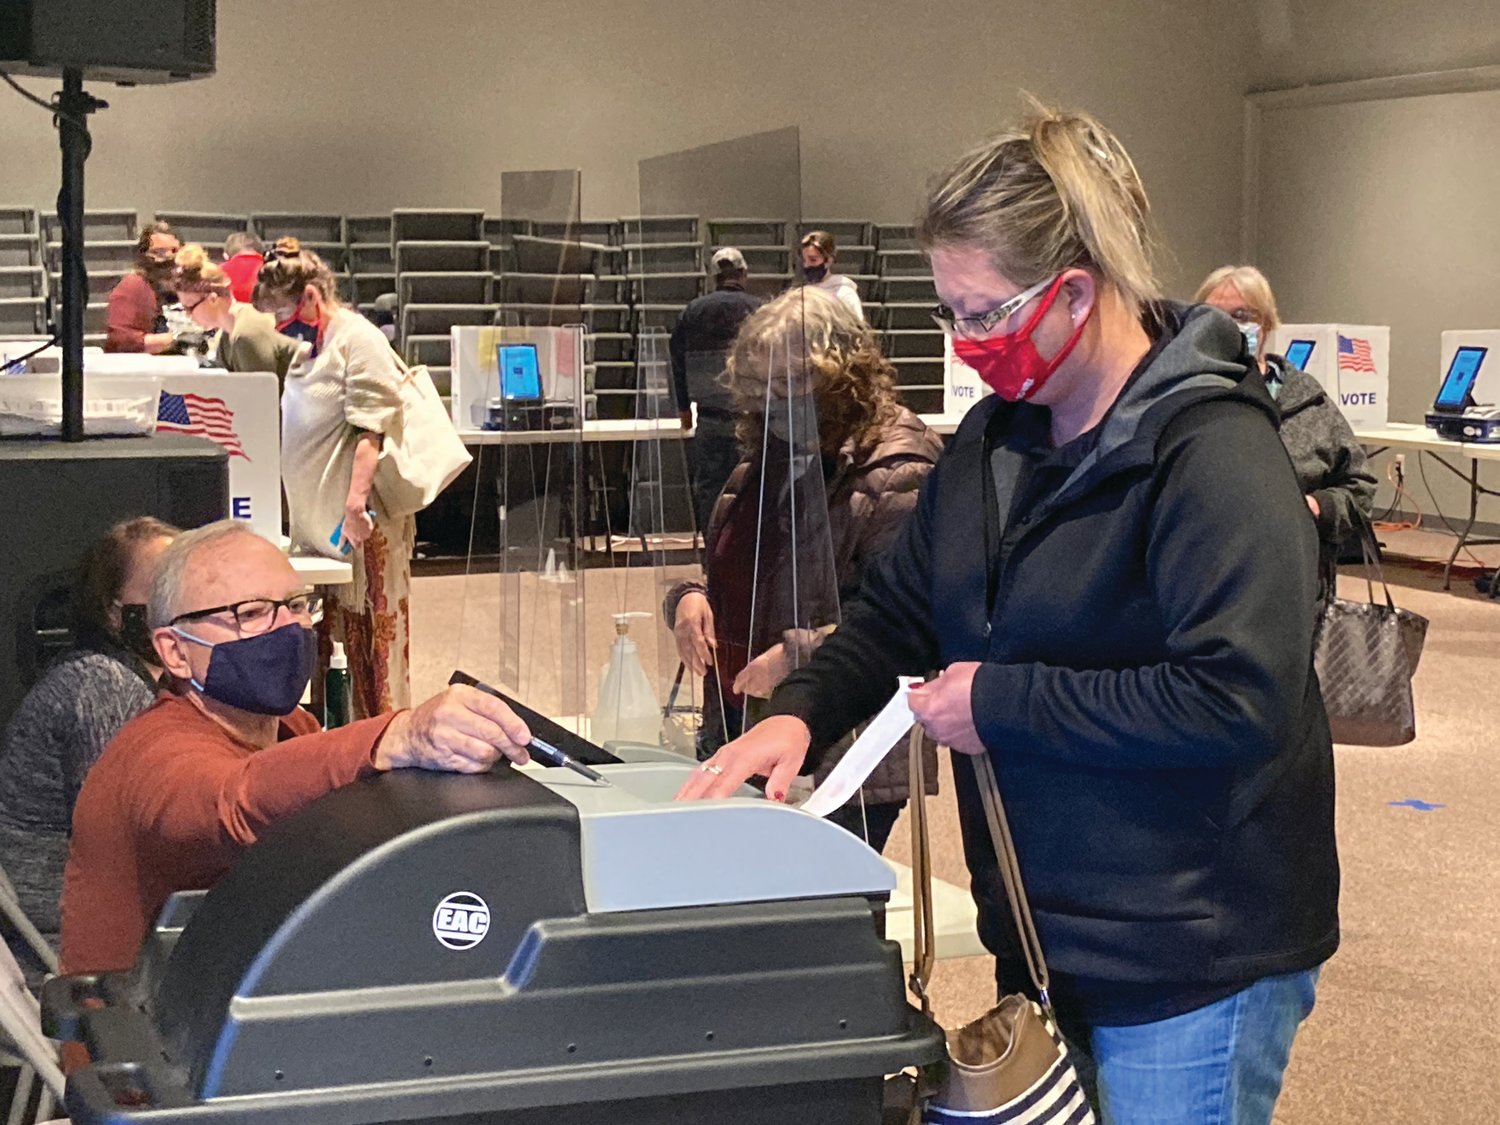 Michelle Hunnicutt inserts her ballot into the tabulation machine Tuesday at Rock Point Church. Local polling sites reported steady traffic of voters.